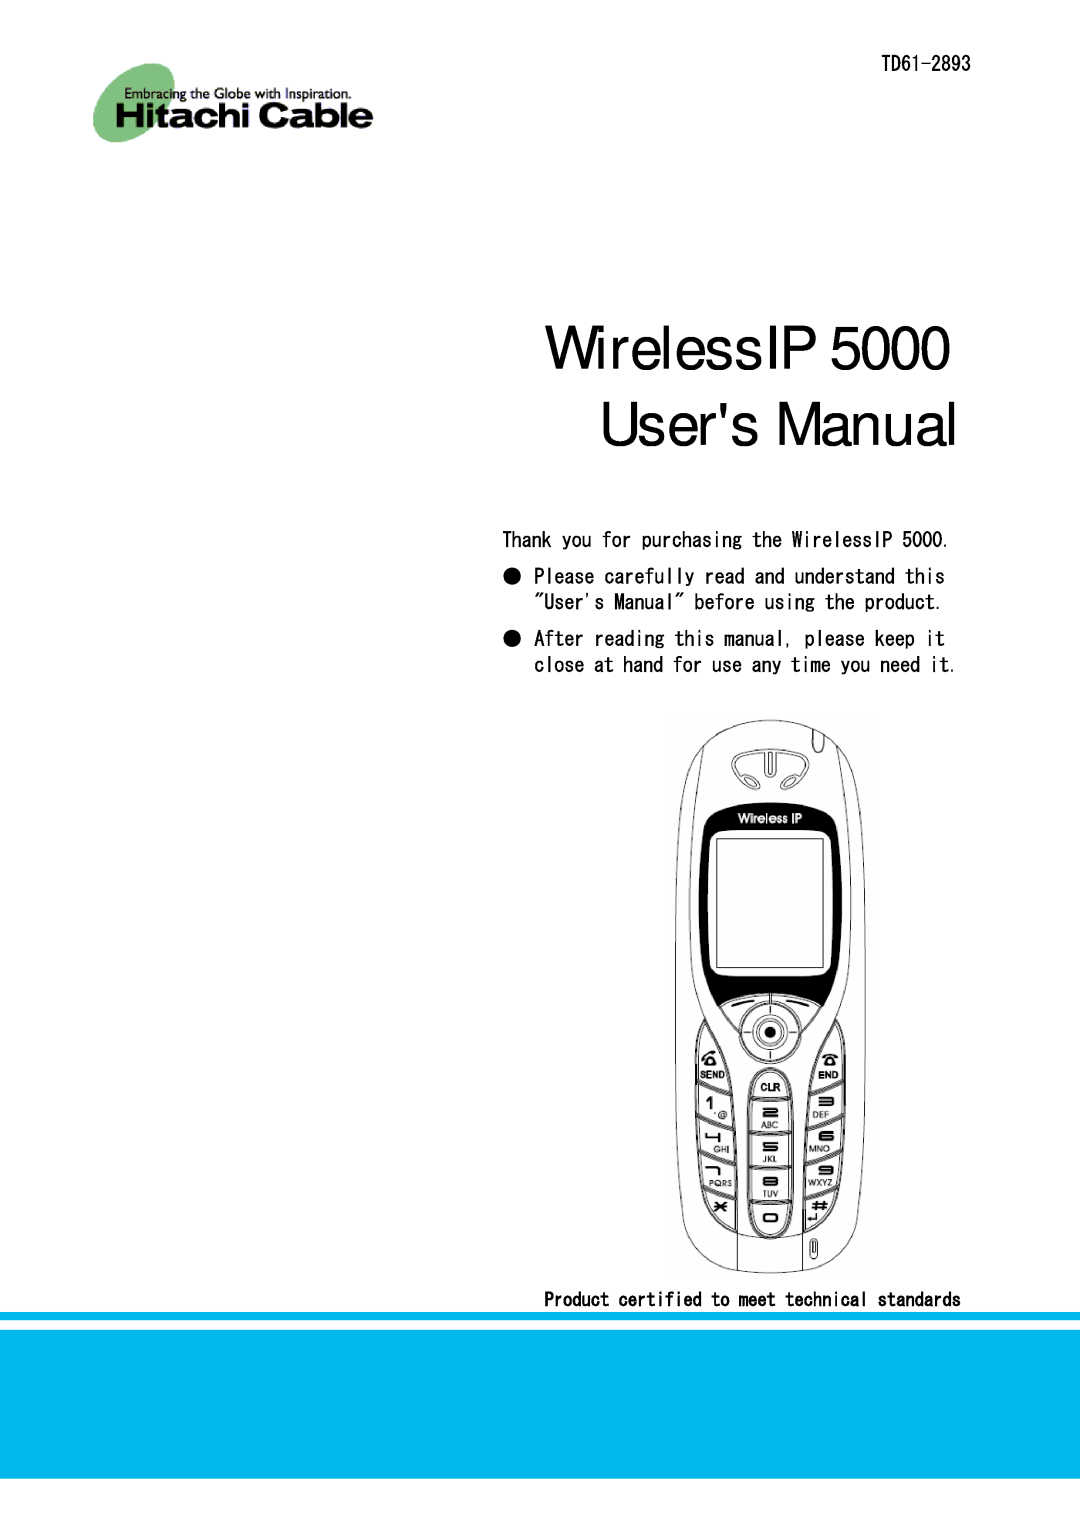 Hitachi 5000 user manual TD61-2893, Thank you for purchasing the WirelessIP 